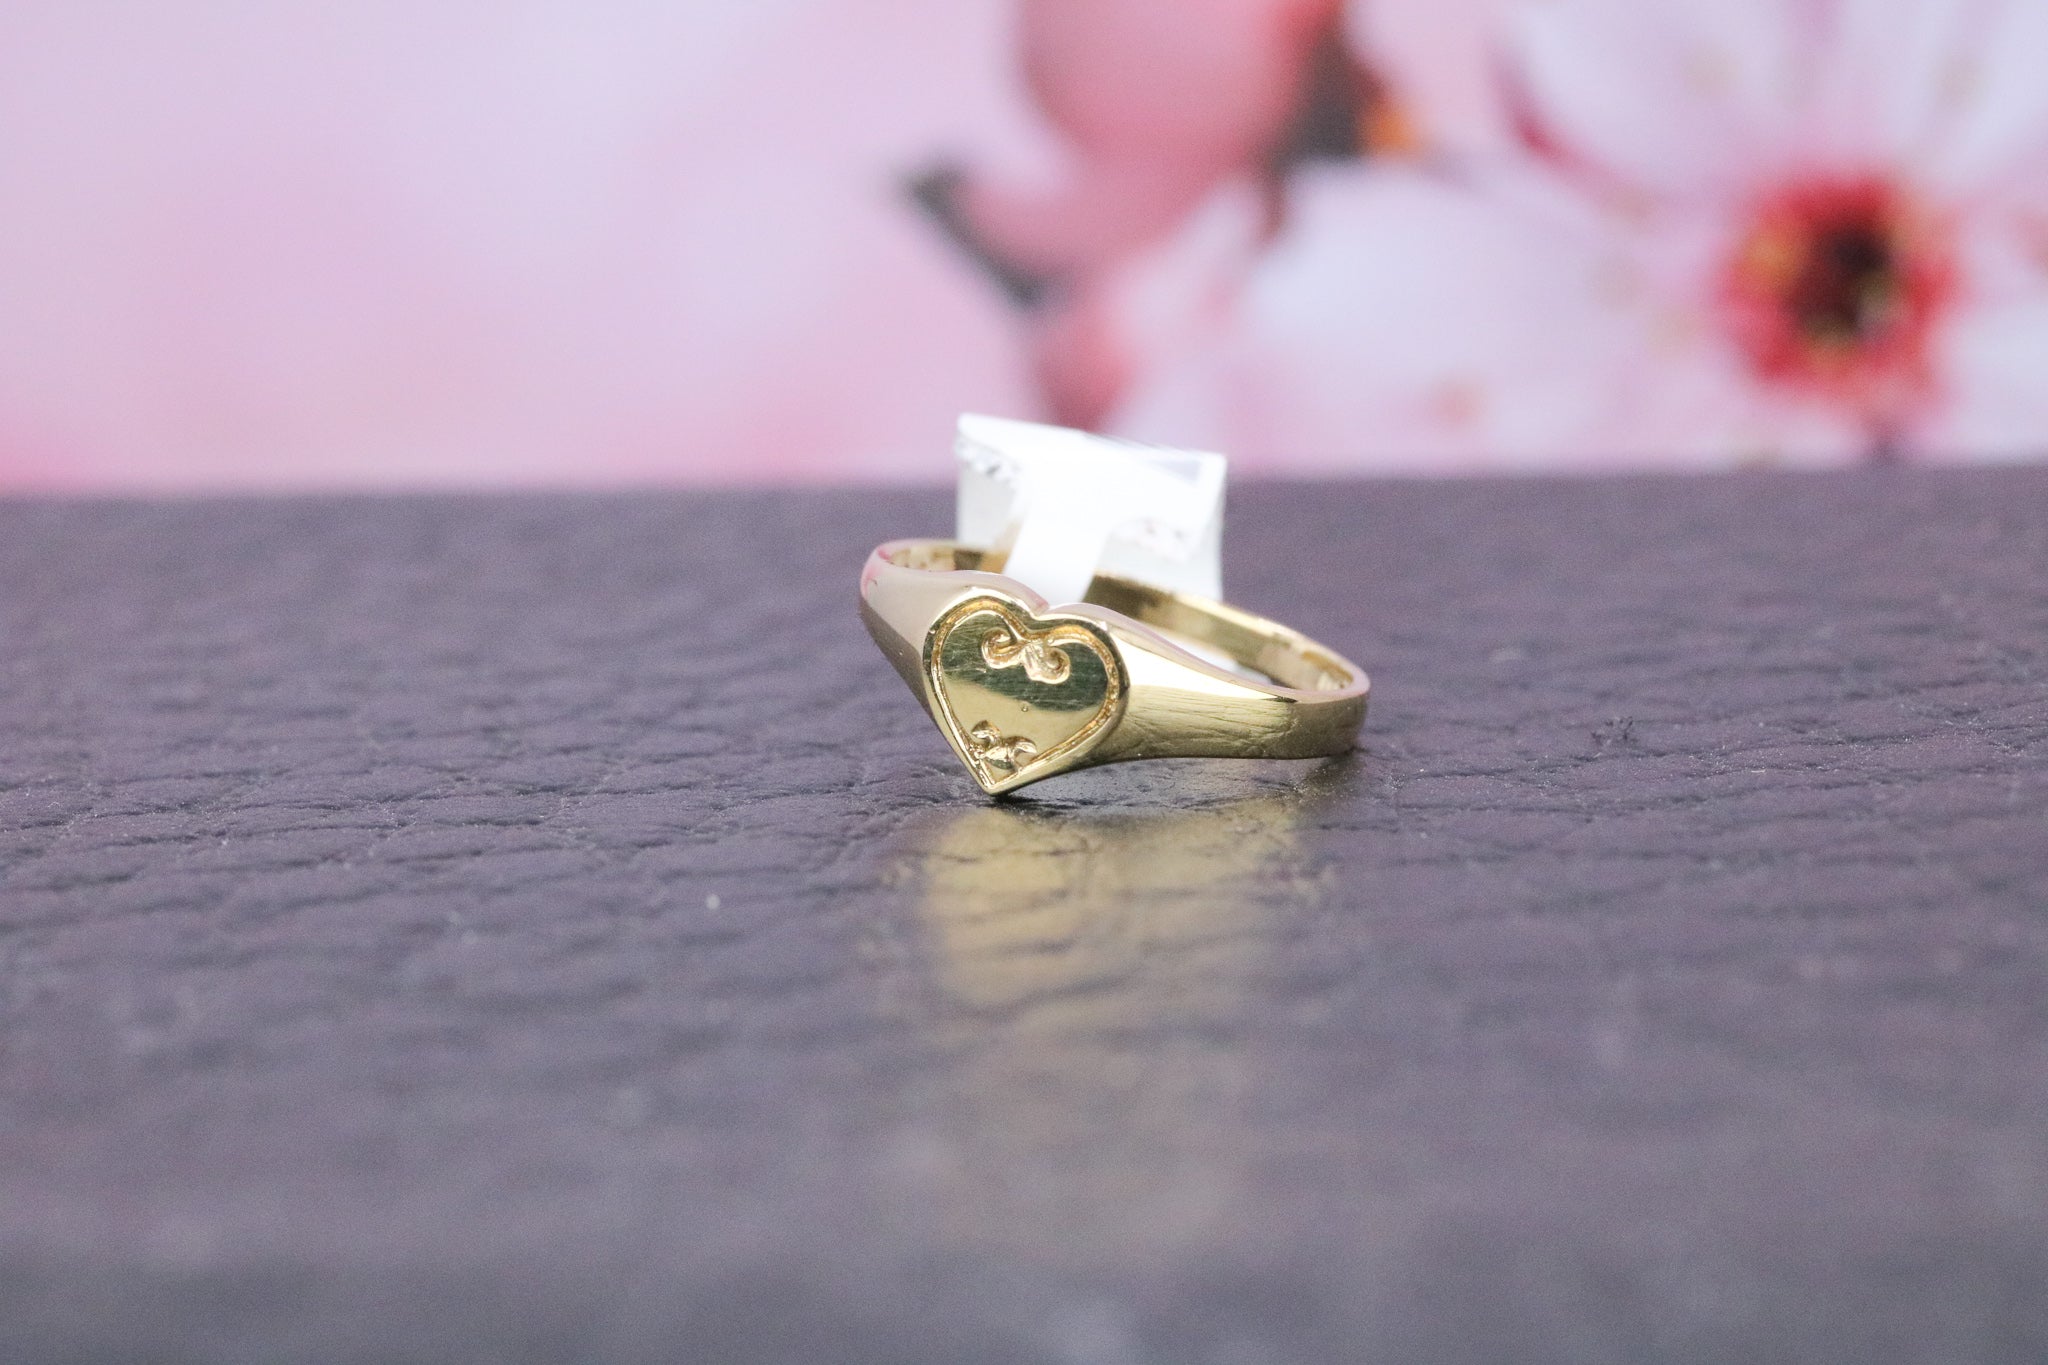 9ct Gold Cygnet Ring - CO1316 - Hallmark Jewellers Formby & The Jewellers Bench Widnes